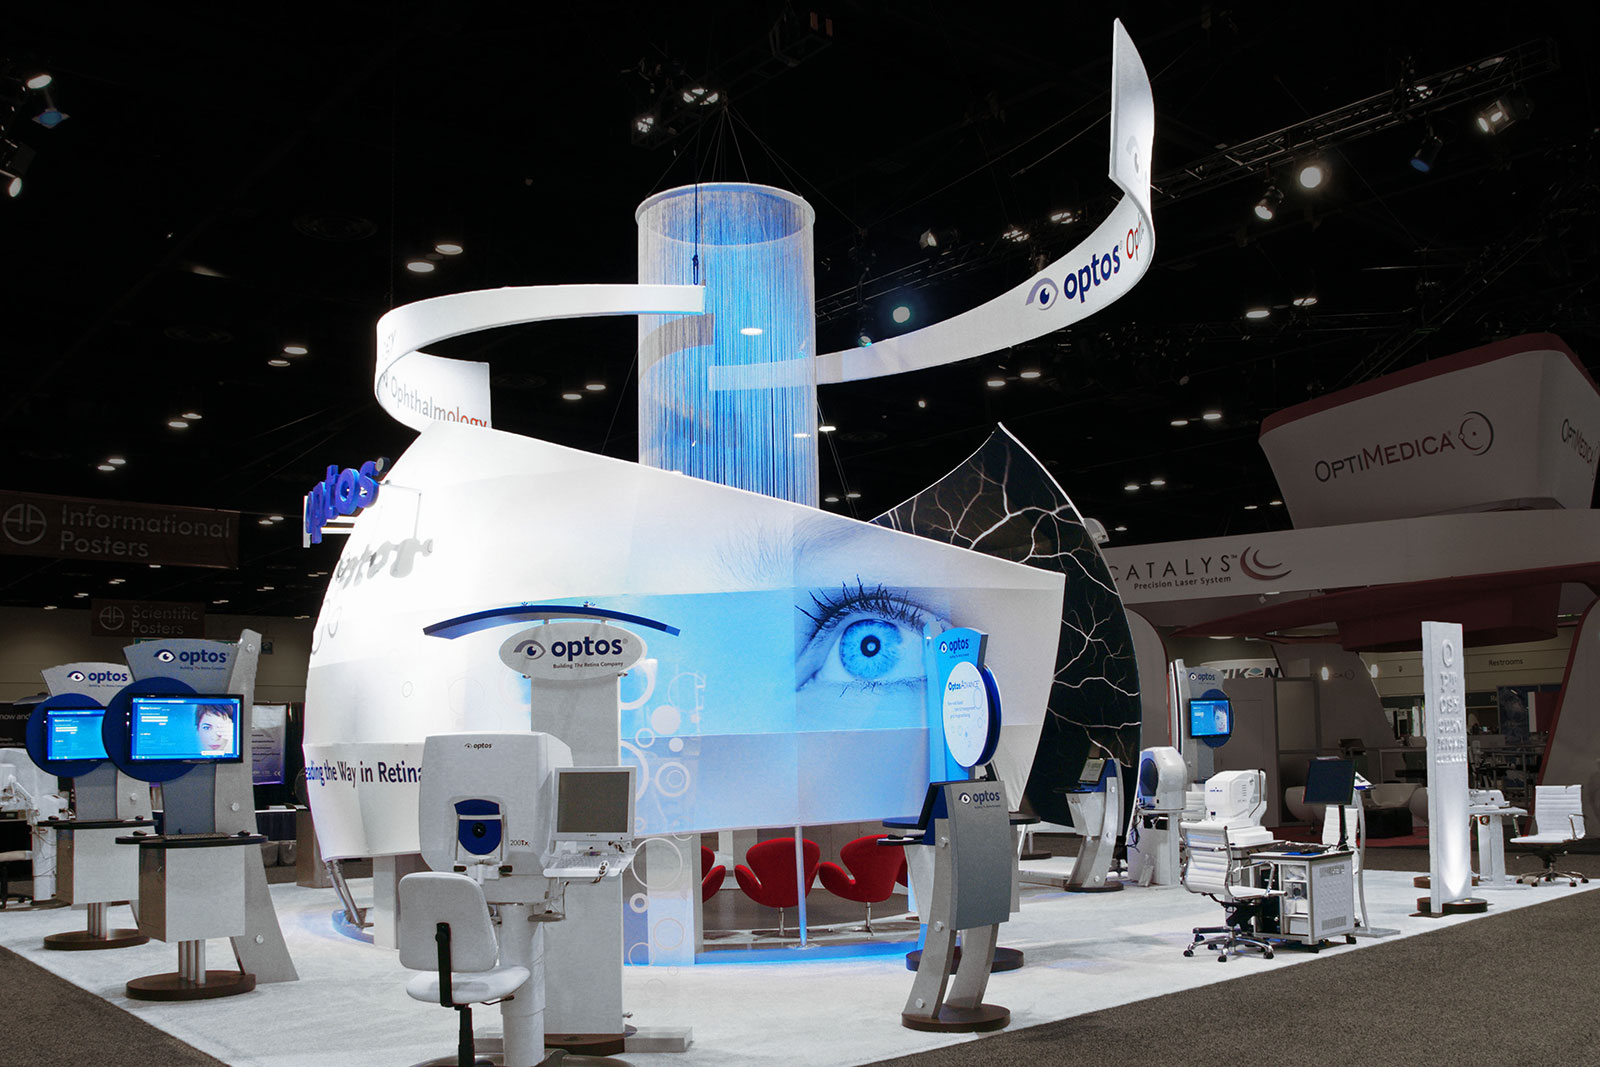 Custom Branded Environment for Optos at Academy of Optometry Trade Show, Full Exhibit